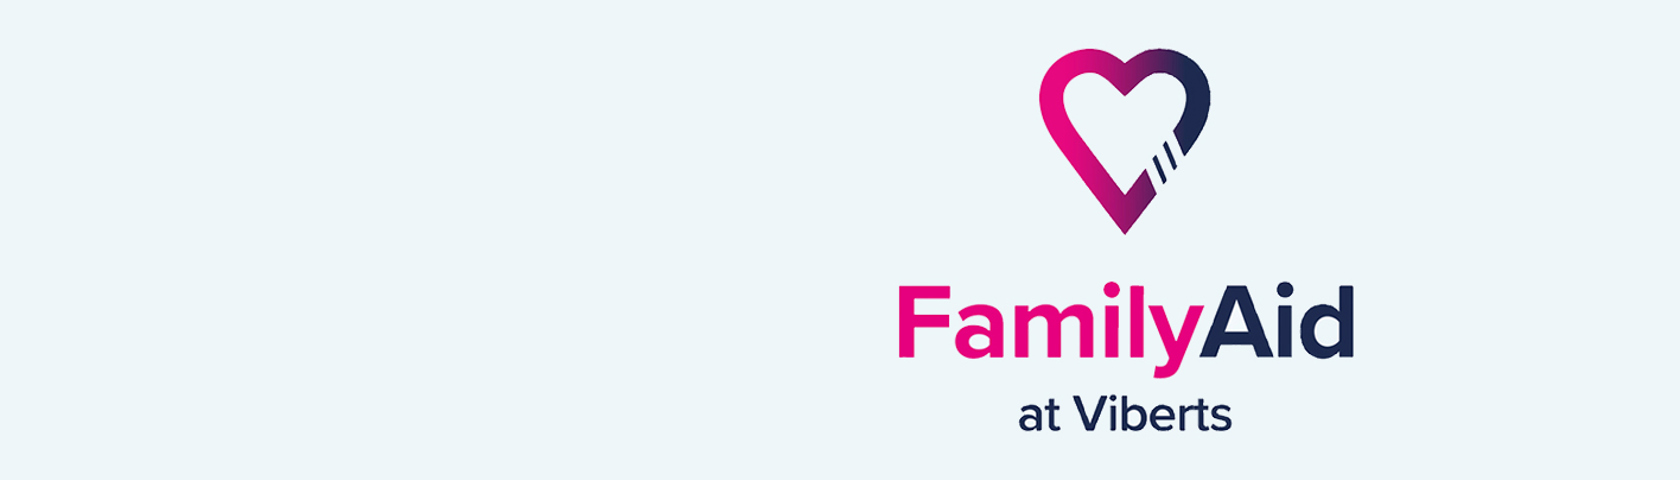 Family Aid Banner For Website Image